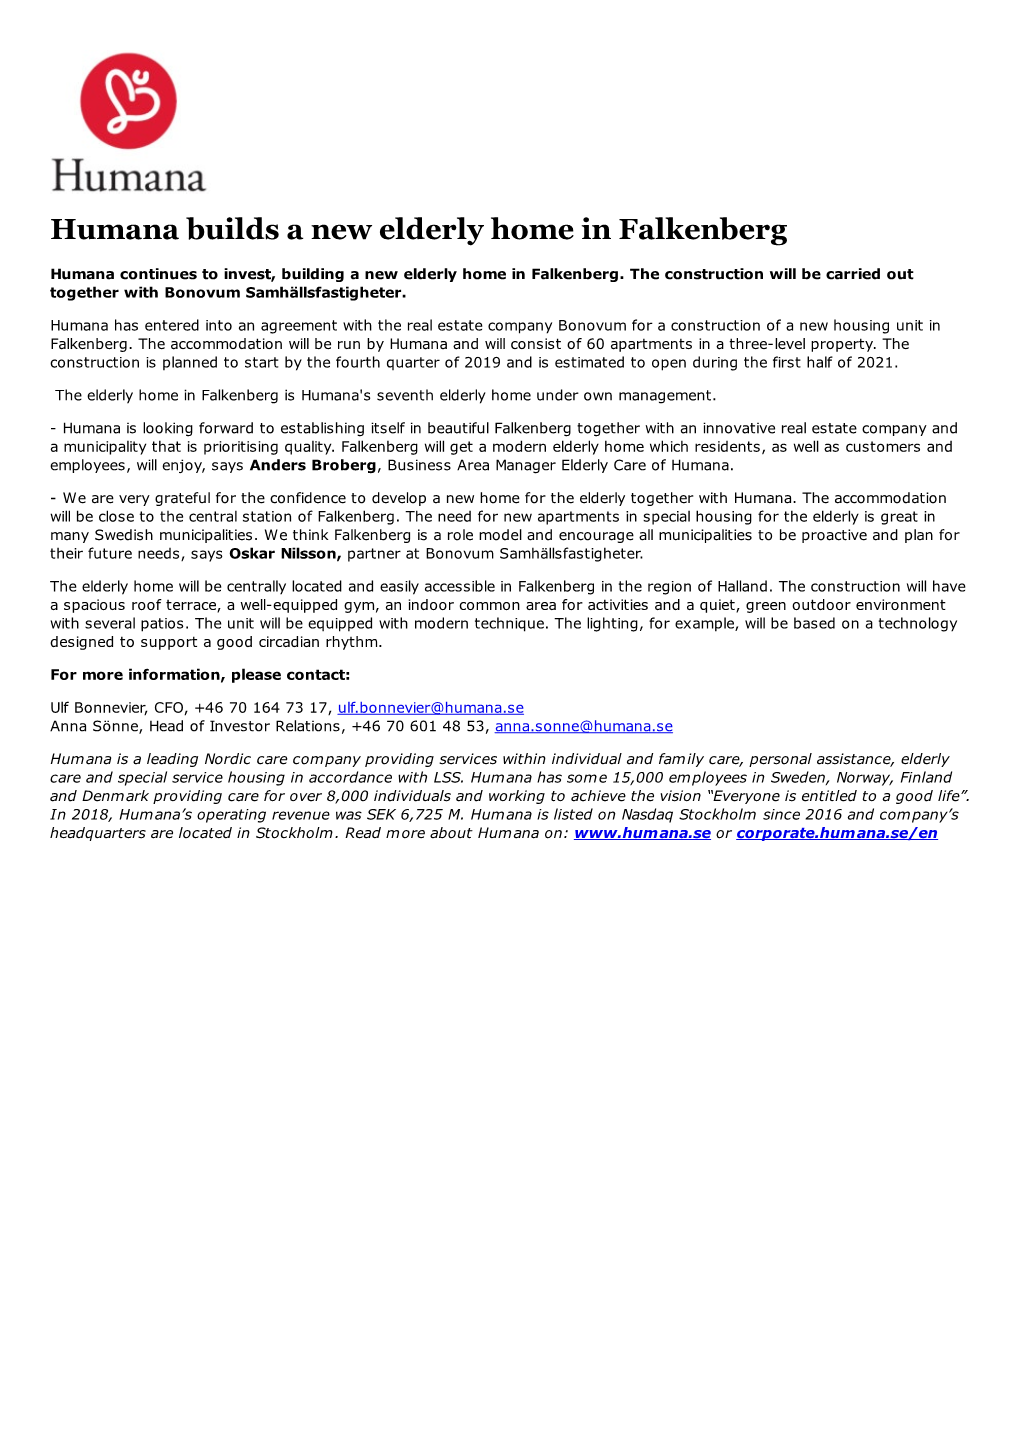 Humana Builds a New Elderly Home in Falkenberg